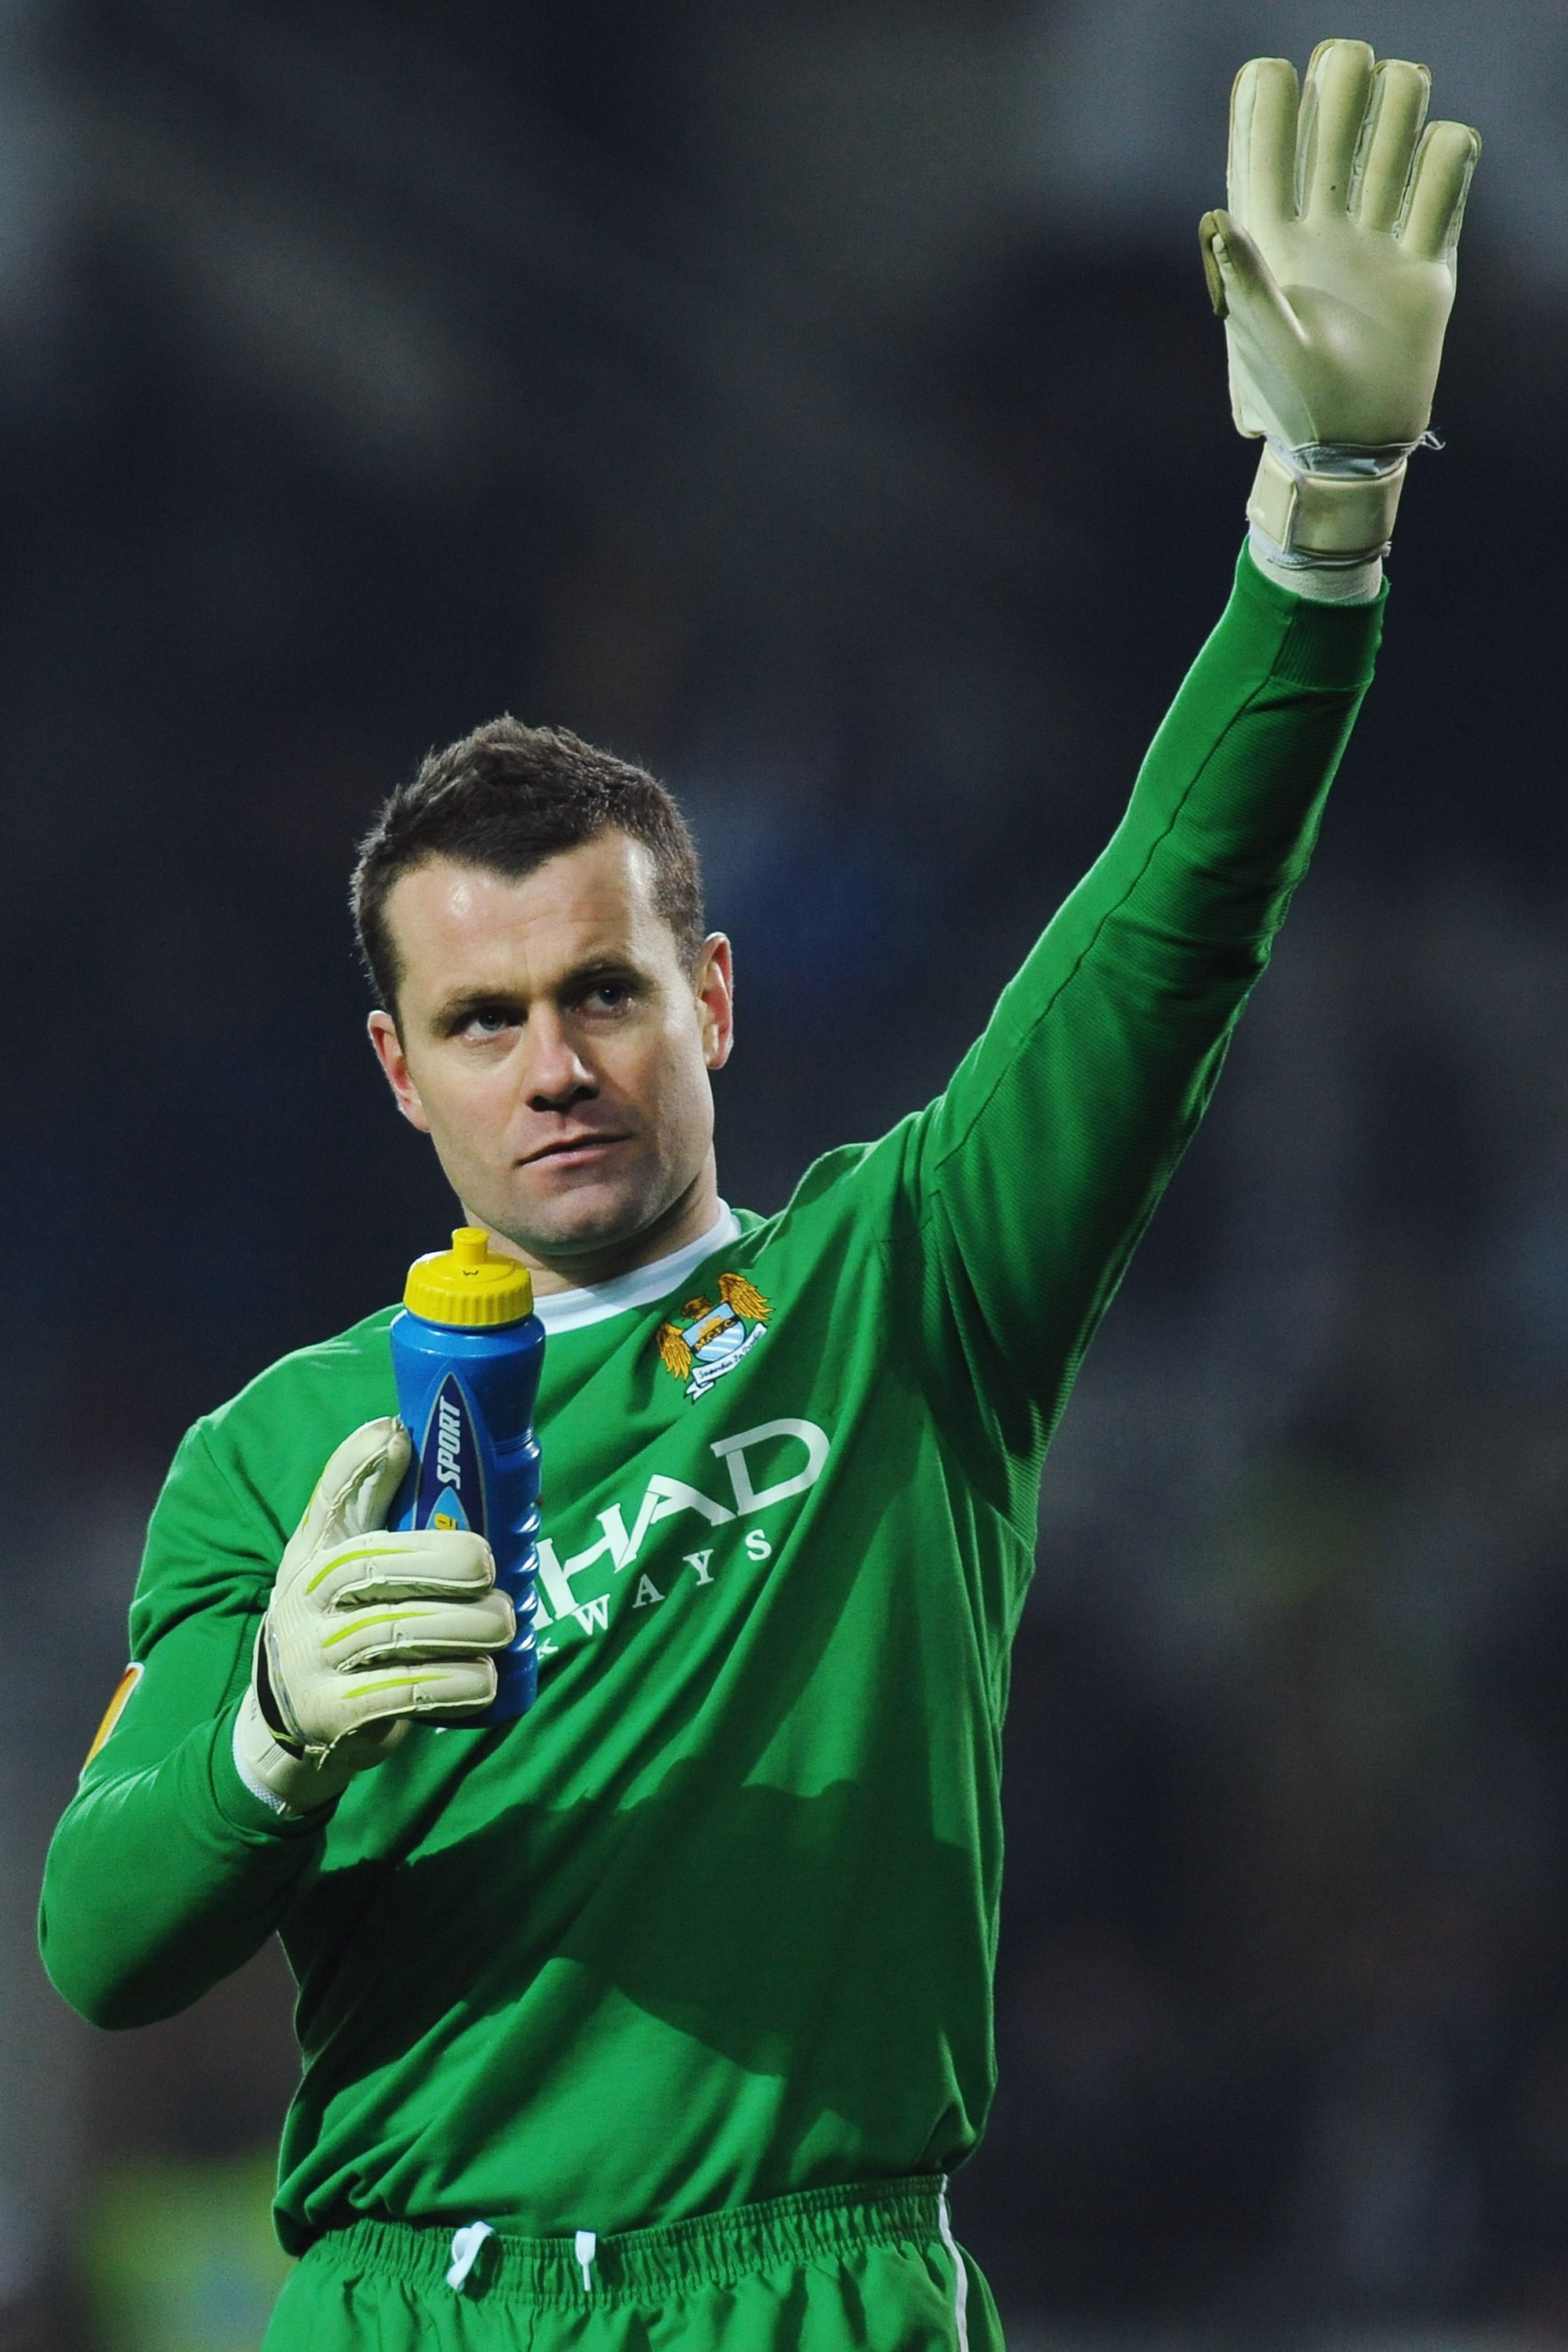 TURIN, ITALY - DECEMBER 16:  Shay Given of Manchester City salutes the crowd at the end of the UEFA Europa League group A match between Juventus FC and Manchester City at Stadio Olimpico di Torino on December 16, 2010 in Turin, Italy.  (Photo by Valerio P